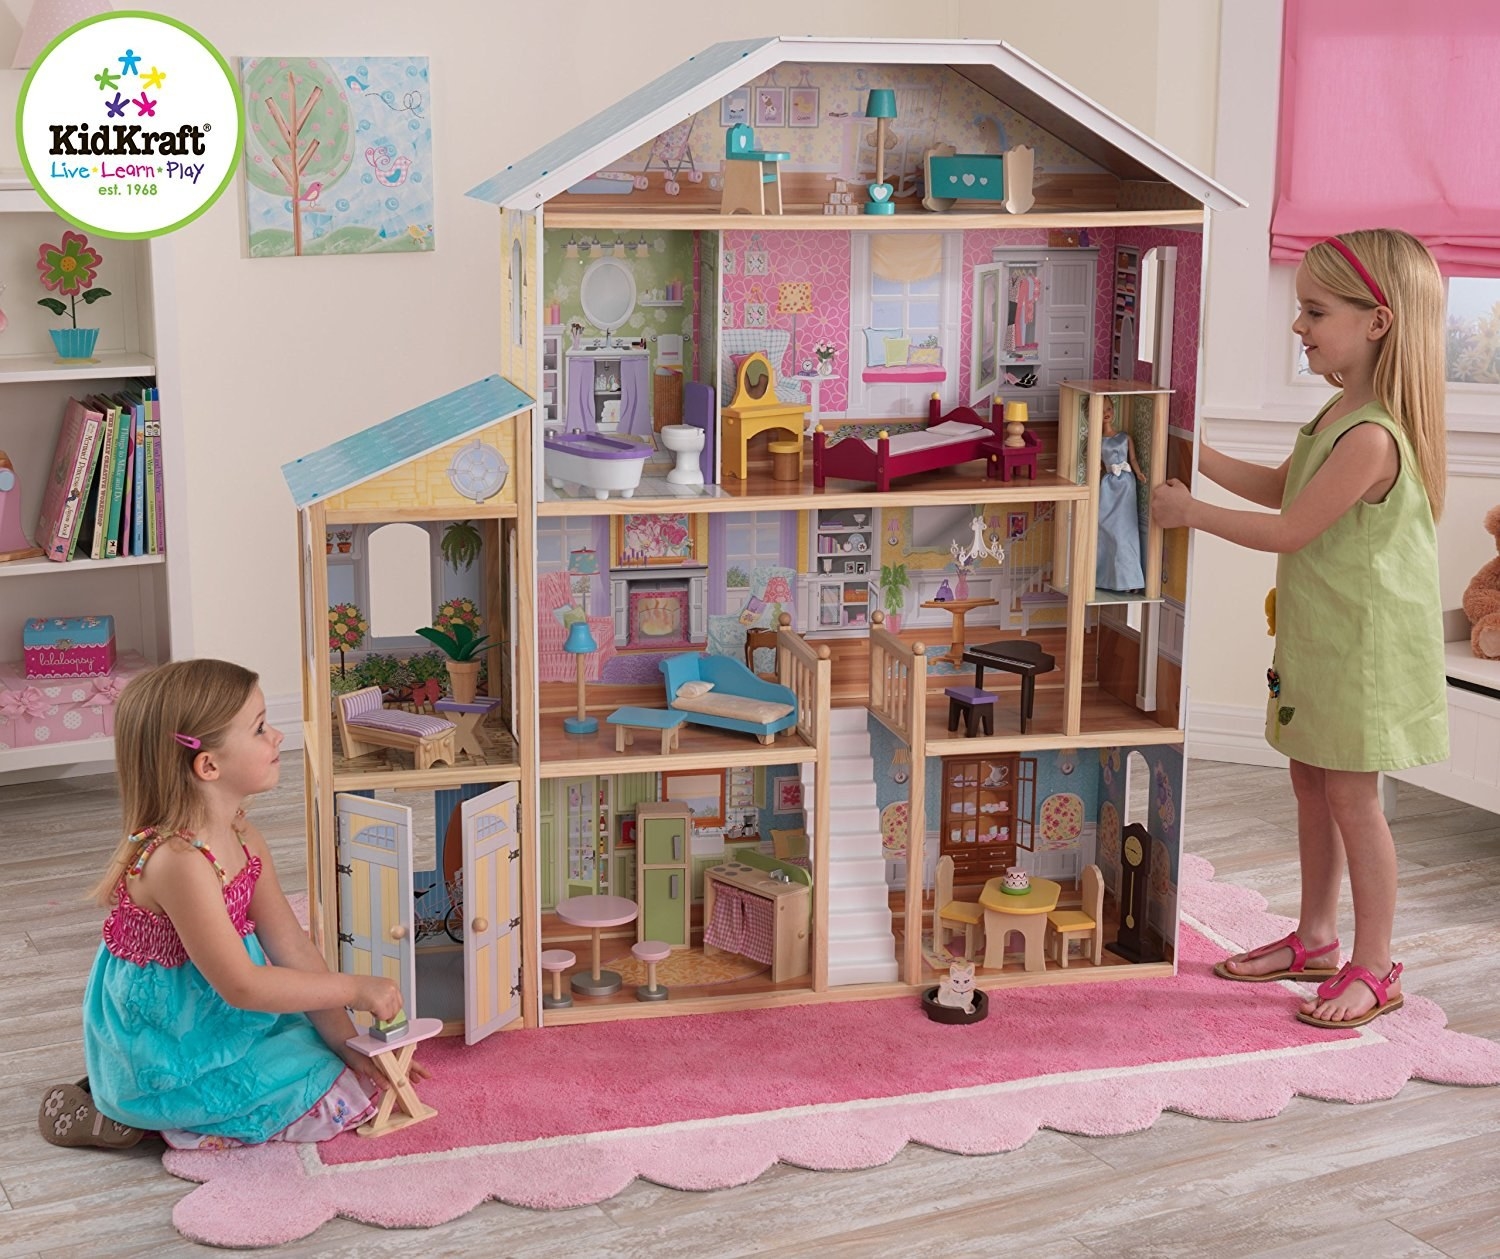 Two little girls playing with the giant dollhouse